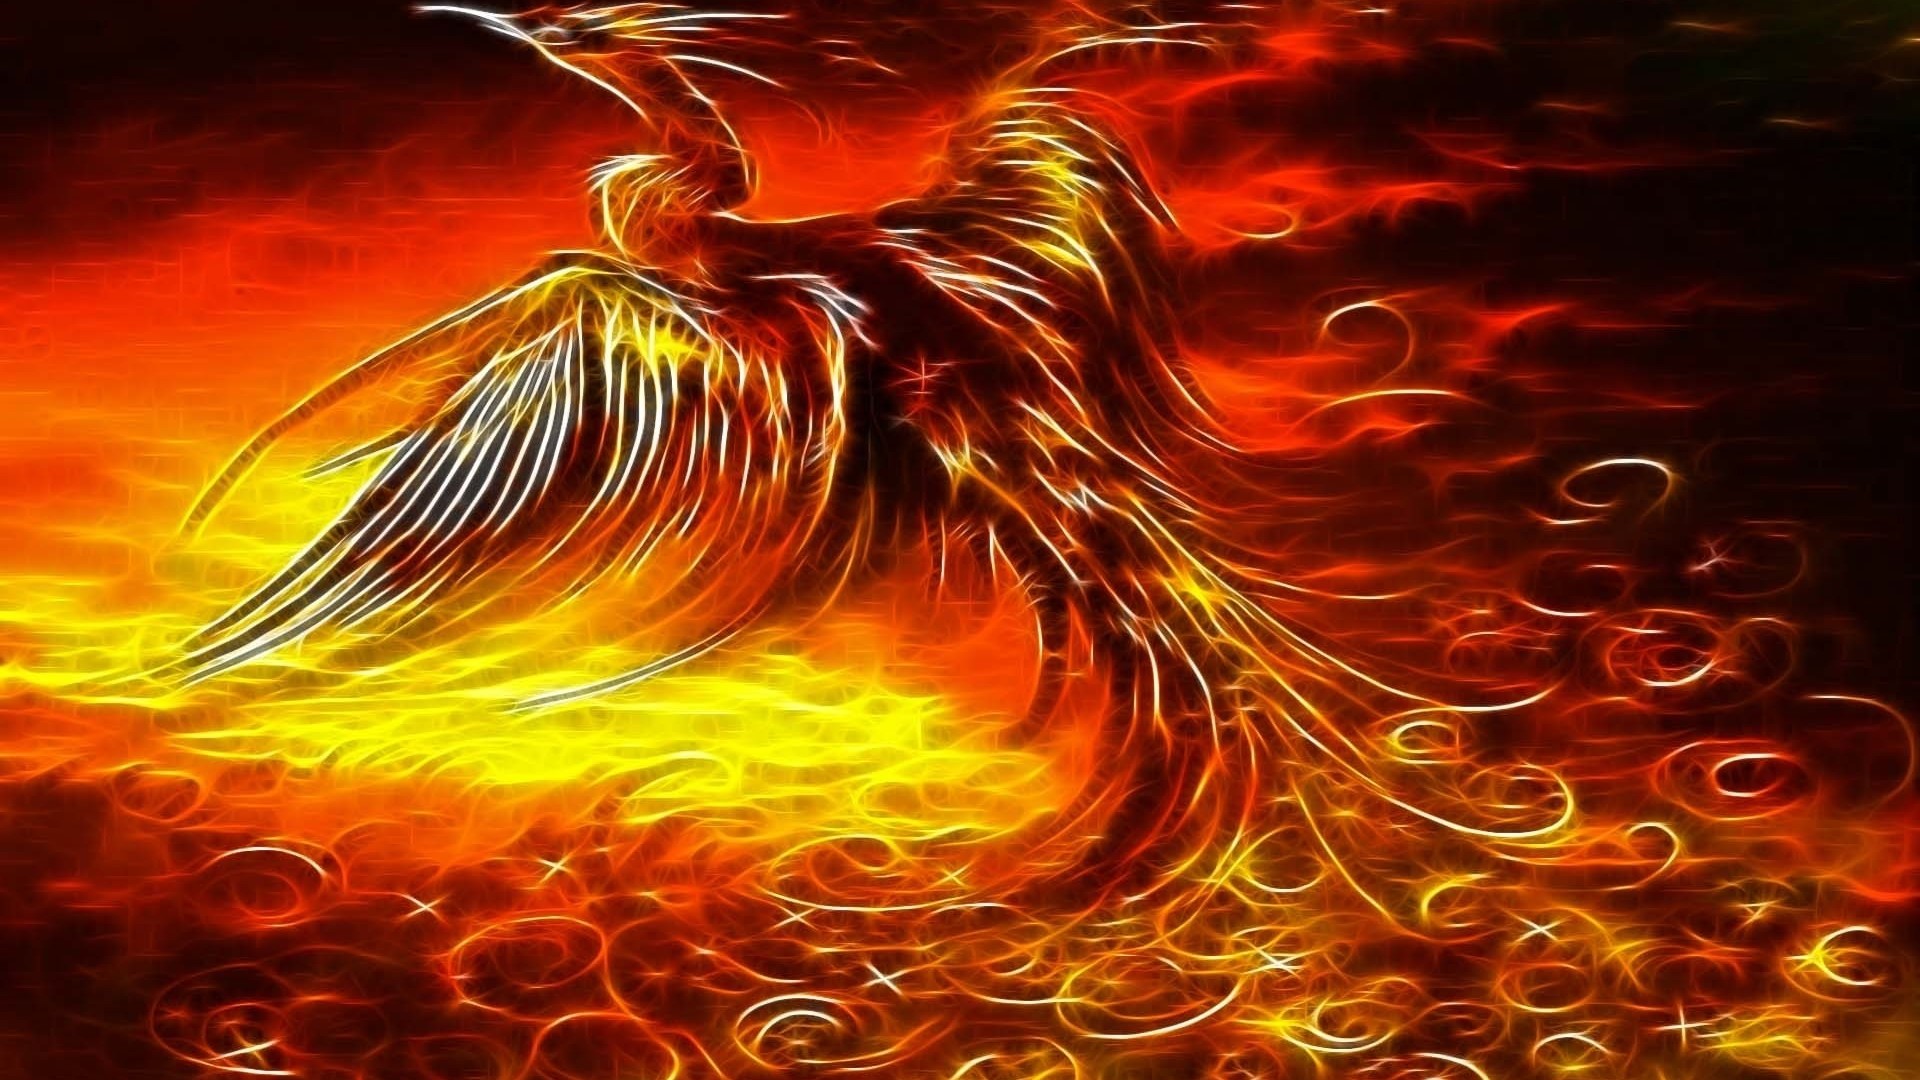 Phoenix Wallpaper with resolution 1920X1080 pixel. You can use this wallpaper as background for your desktop Computer Screensavers, Android or iPhone smartphones